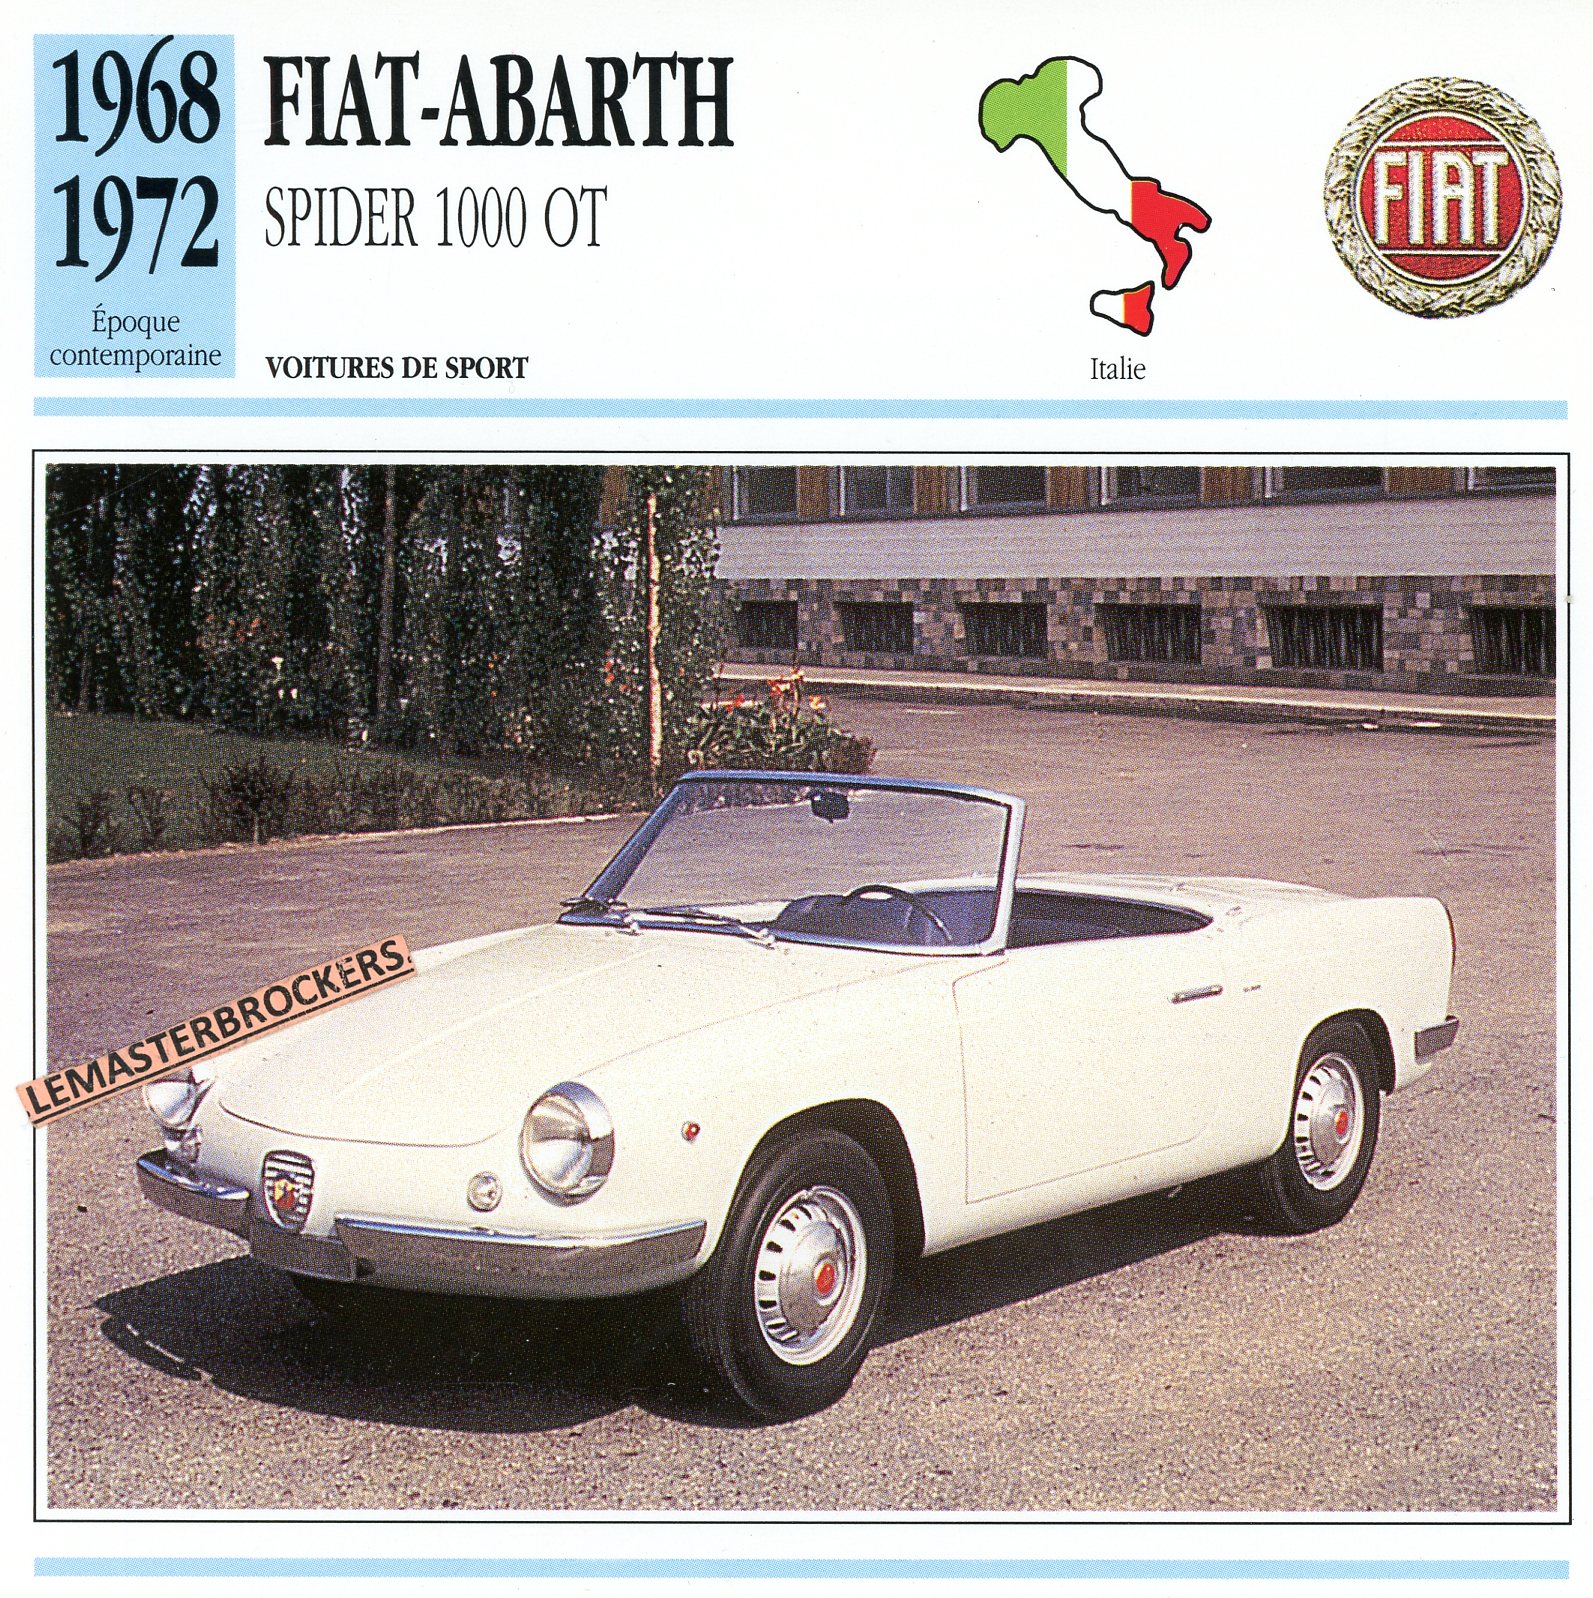 FICHE-FIAT-ABARTH-SPIDER-1000-CARD-CARS-LEMASTERBROCKERS